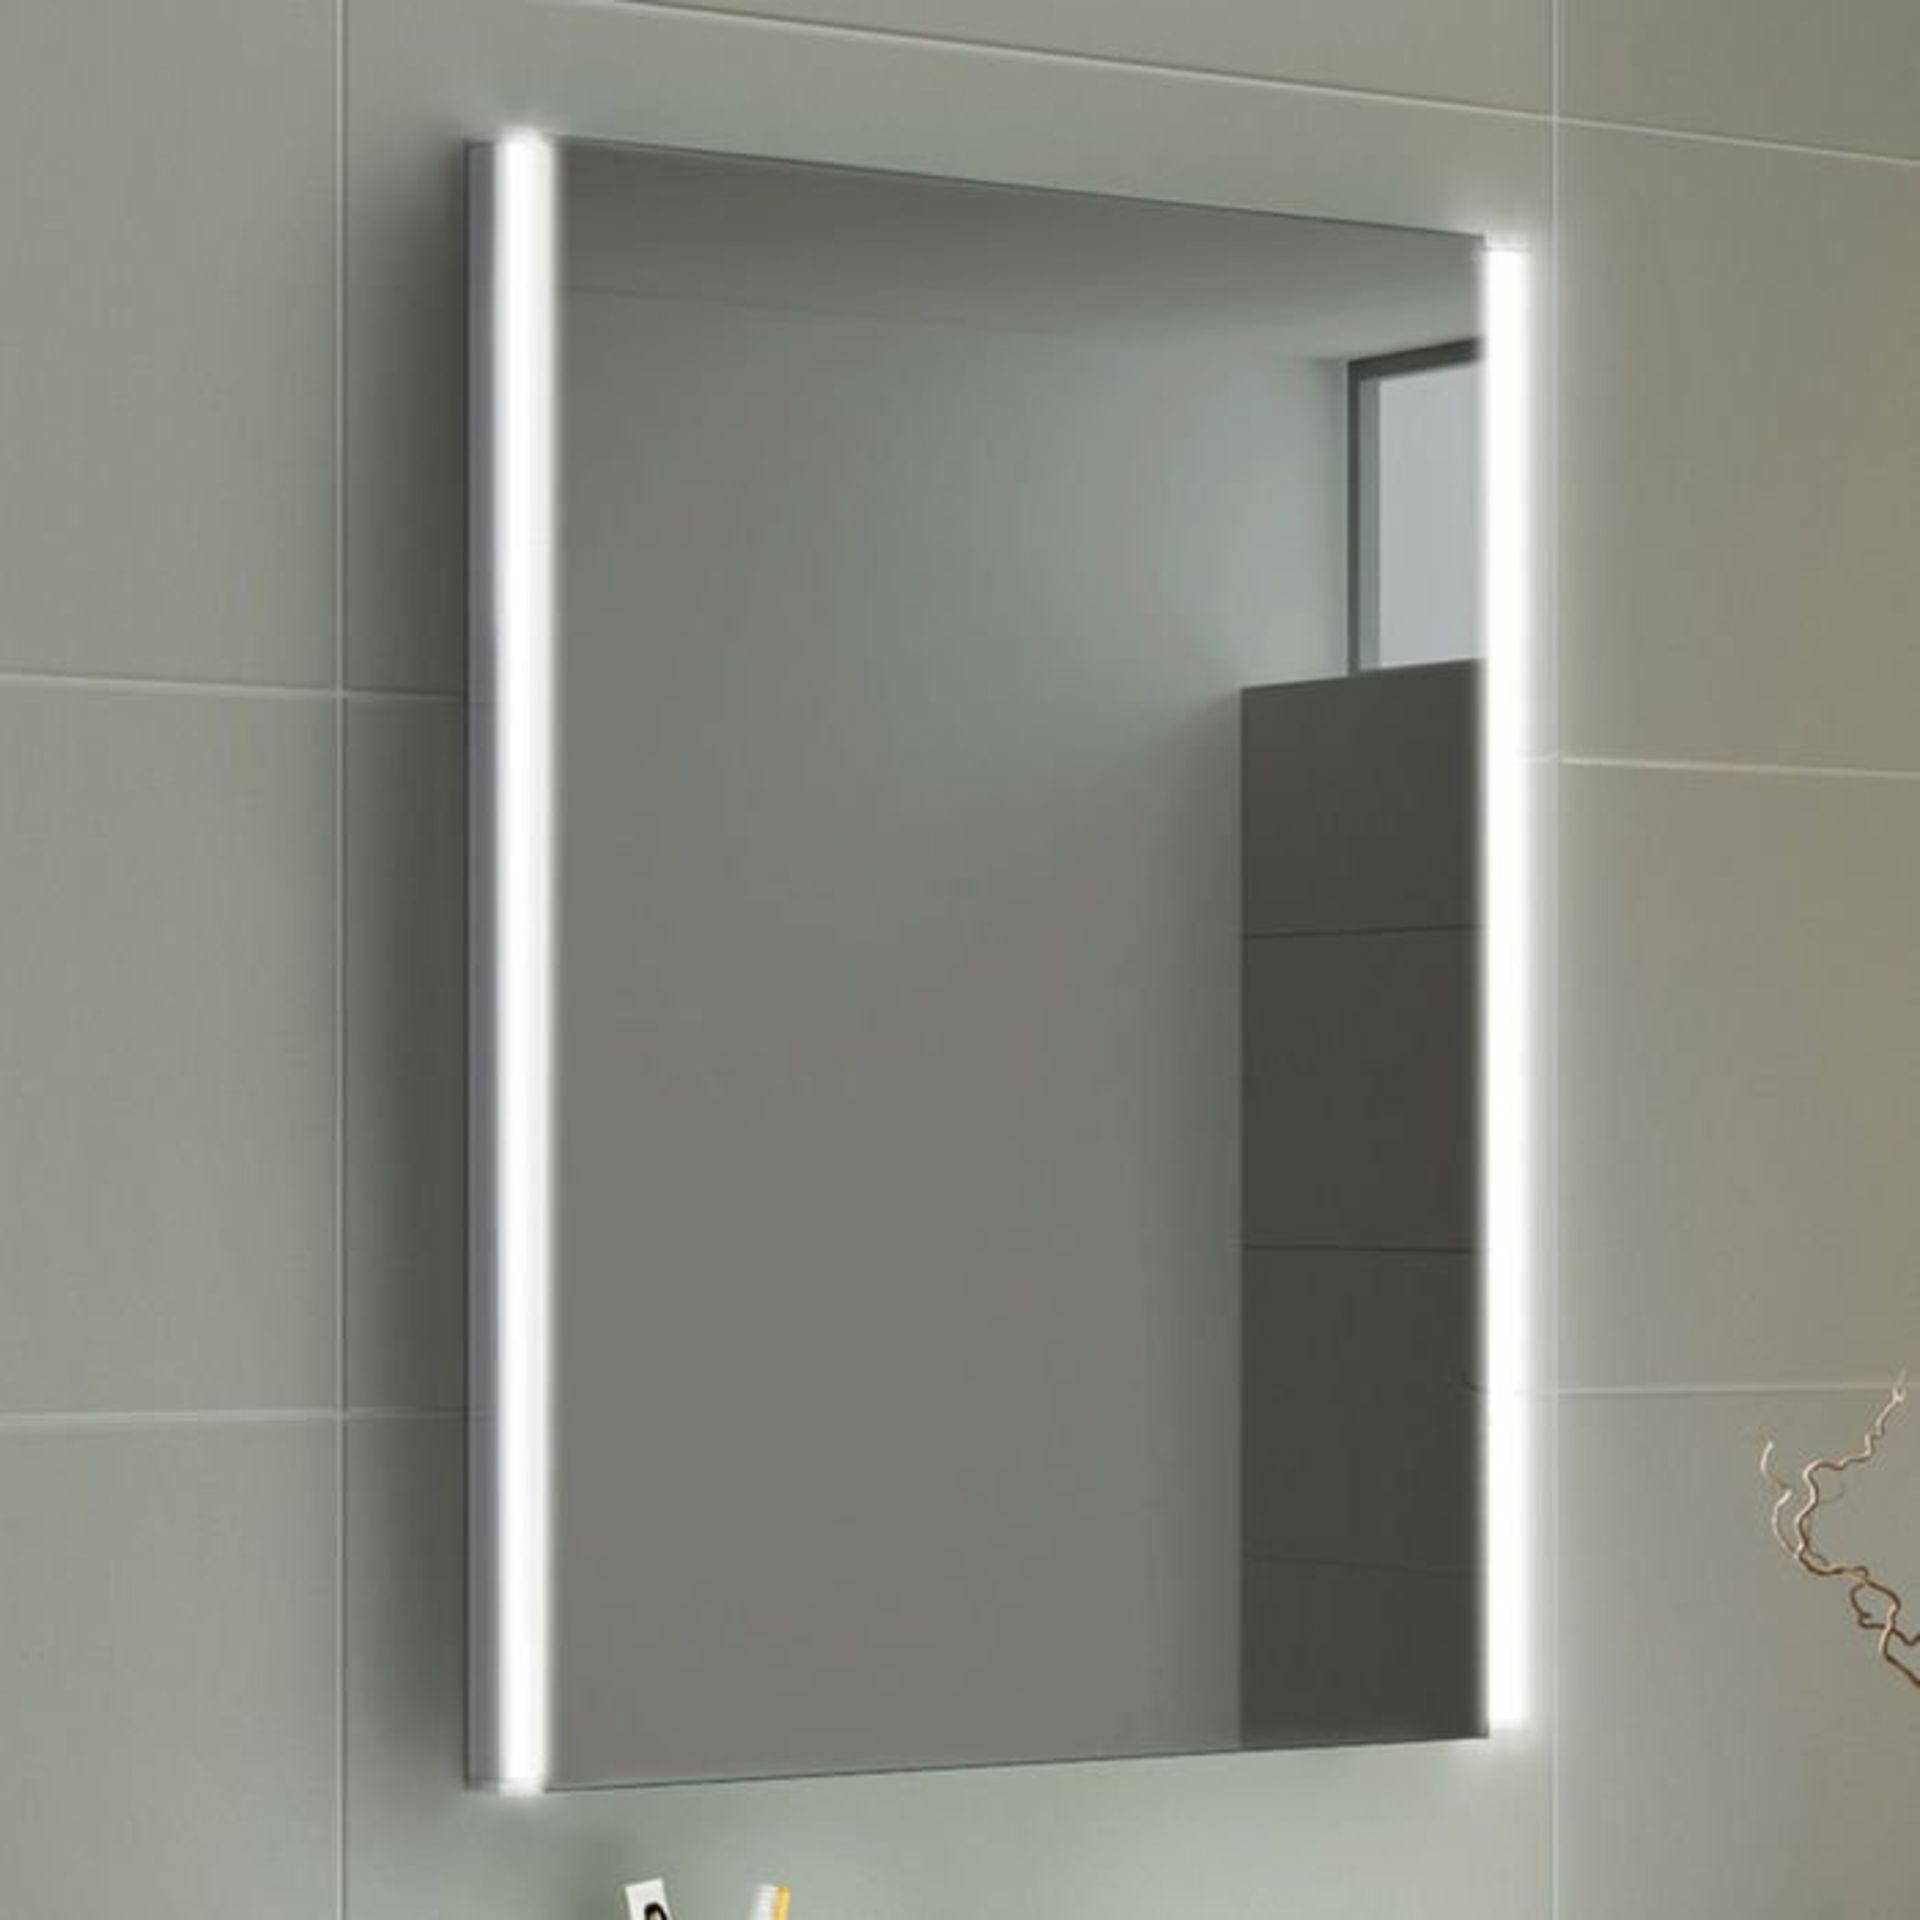 (H168) 500x700mm Lunar LED Mirror - Battery Operated. nergy saving controlled On / Off switch - Image 2 of 3